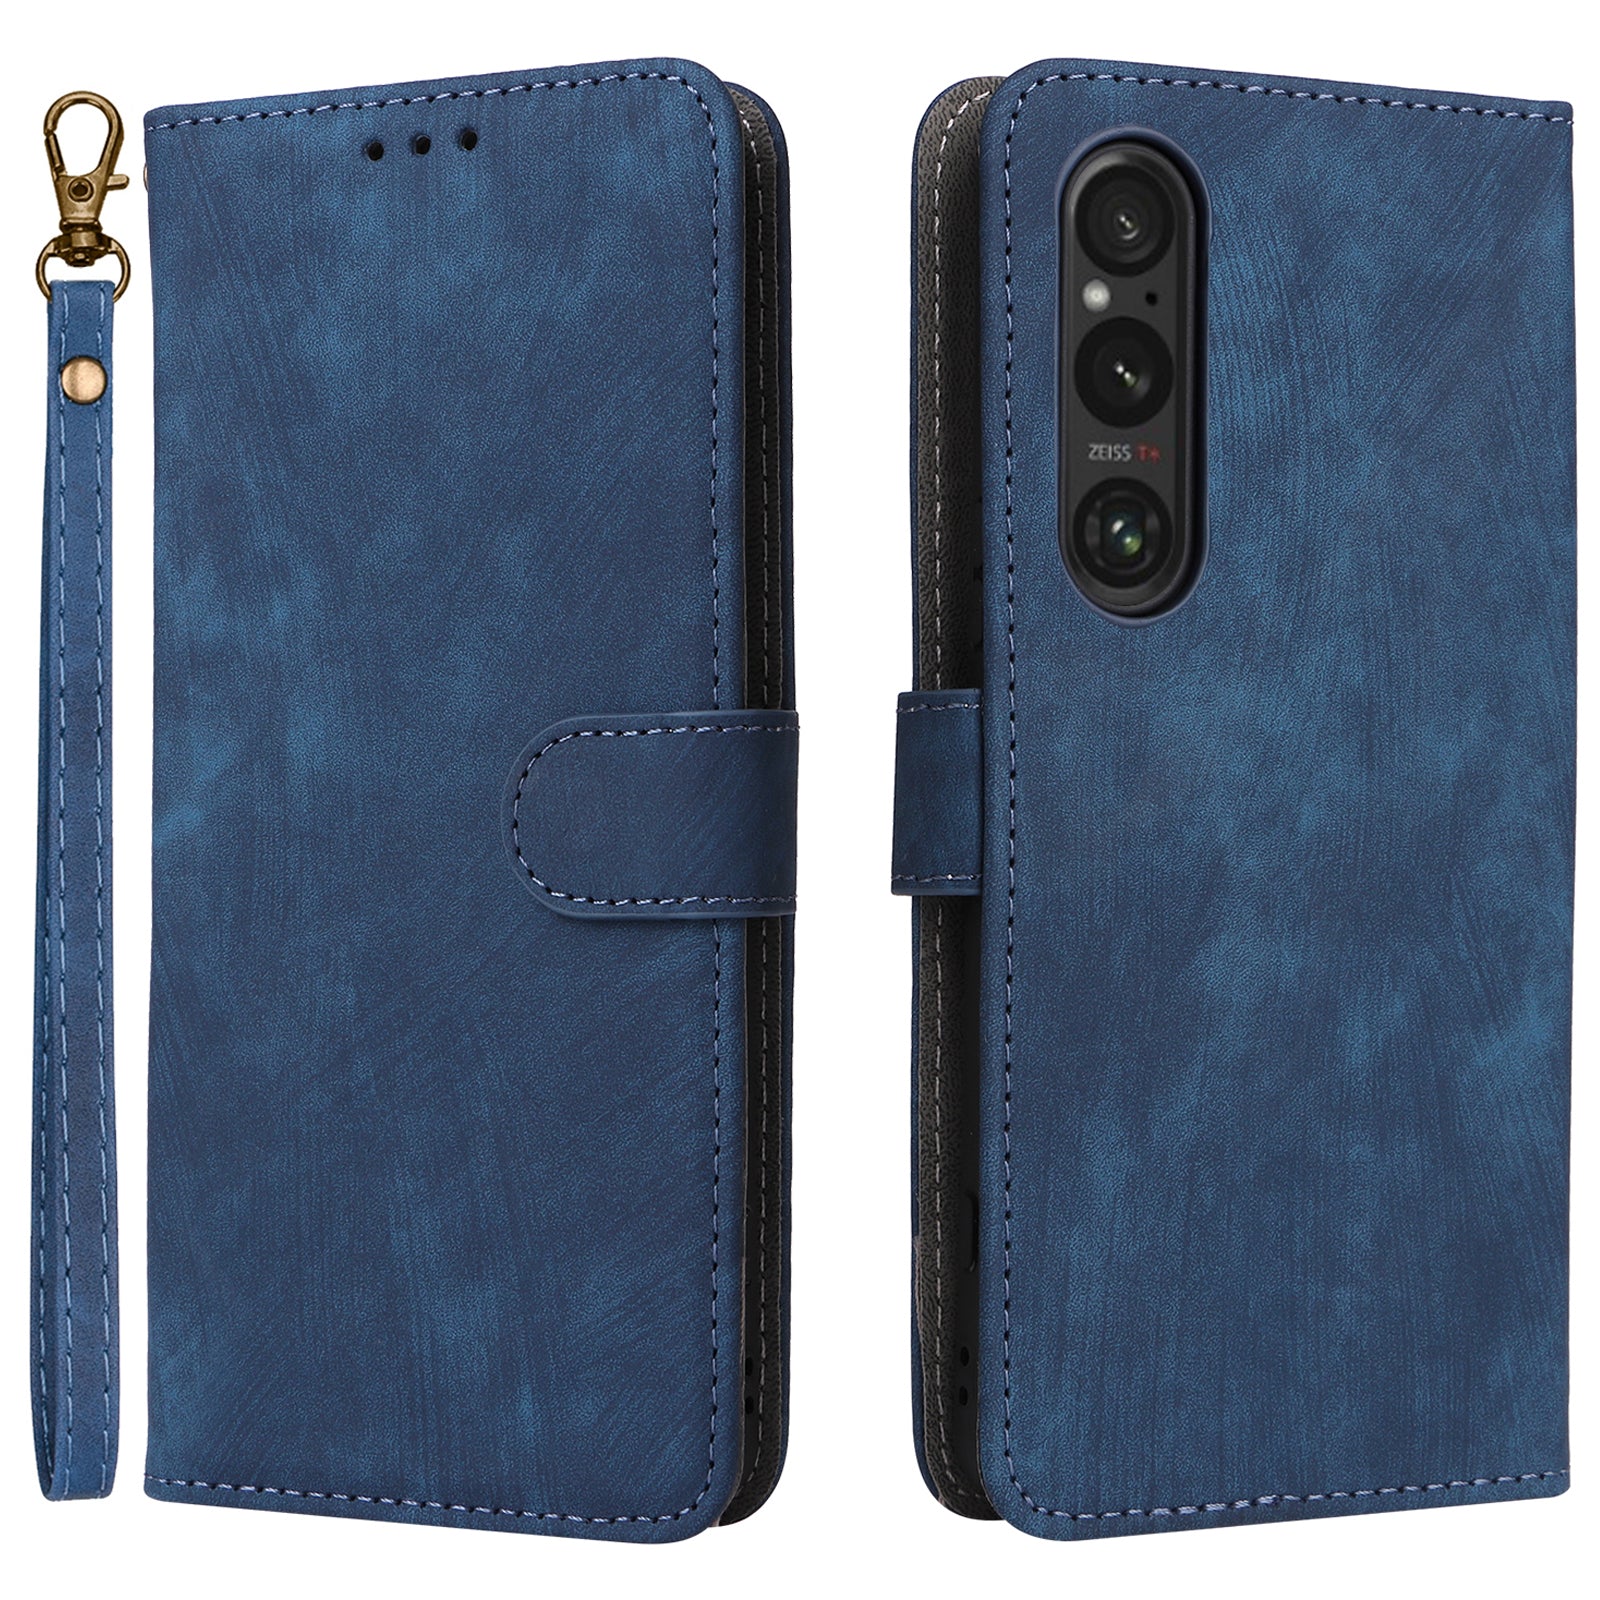 For Sony Xperia 1 VI Leather Case RFID Blocking Wallet Cover with Wrist Strap - Blue